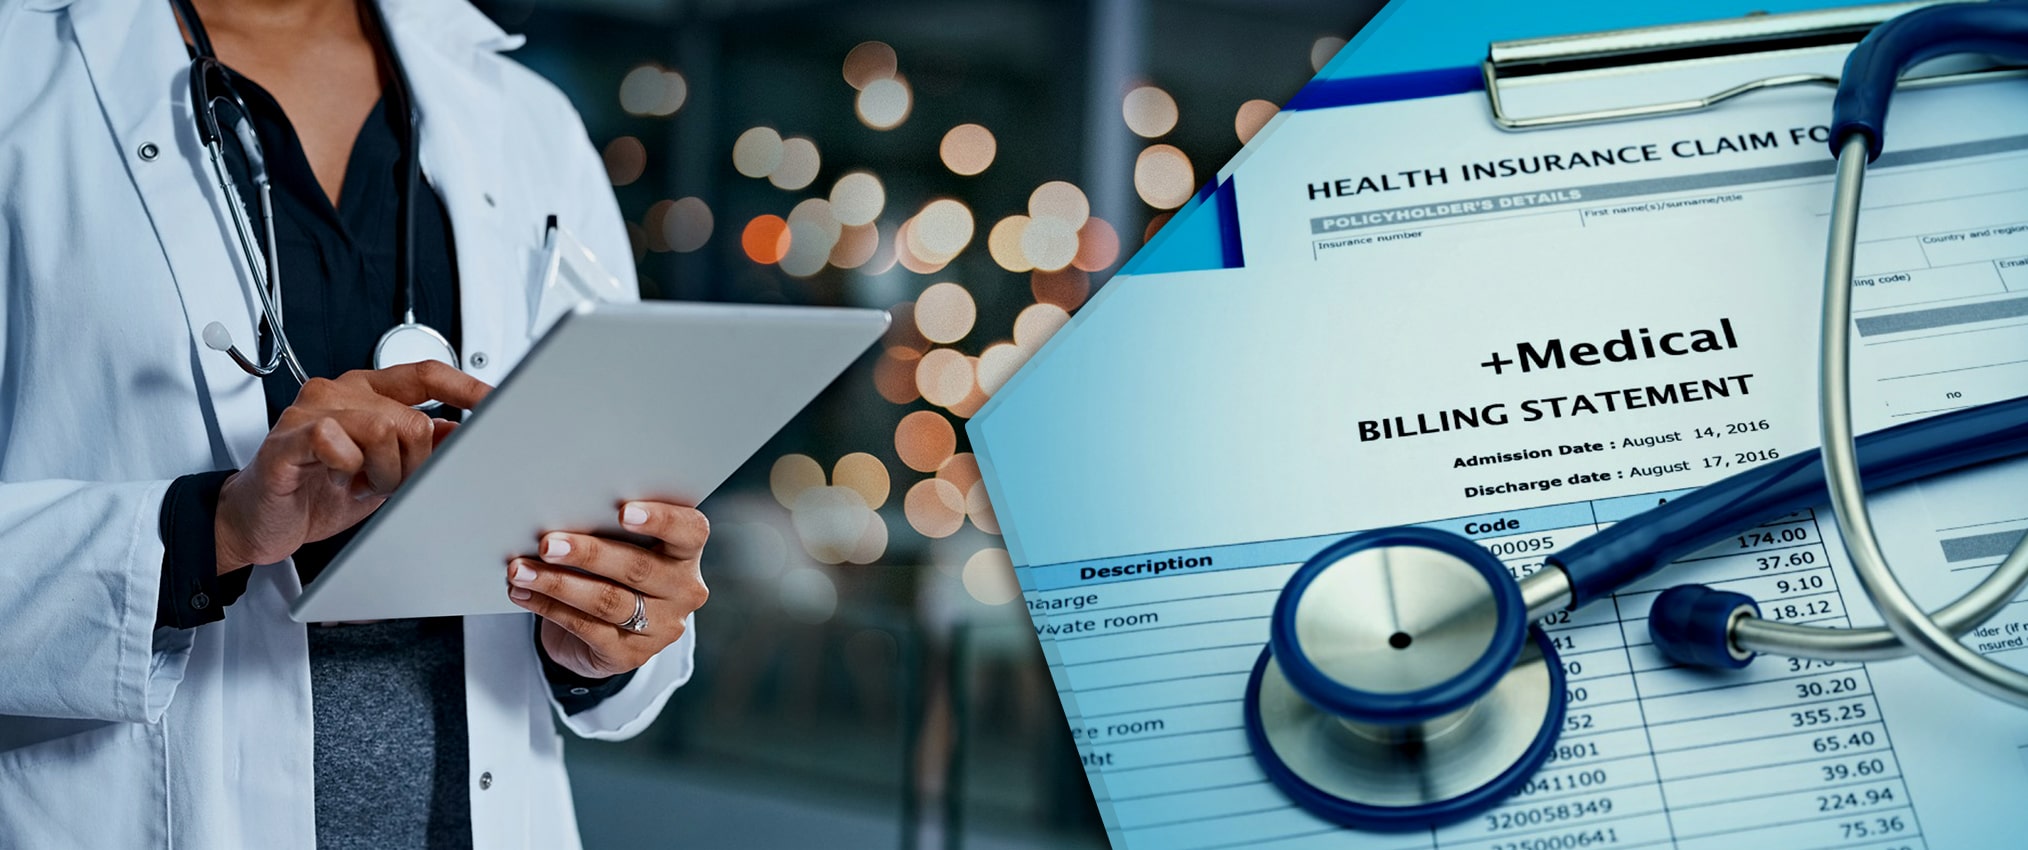 What Are The Traits To Look For In a Medical Billing Company